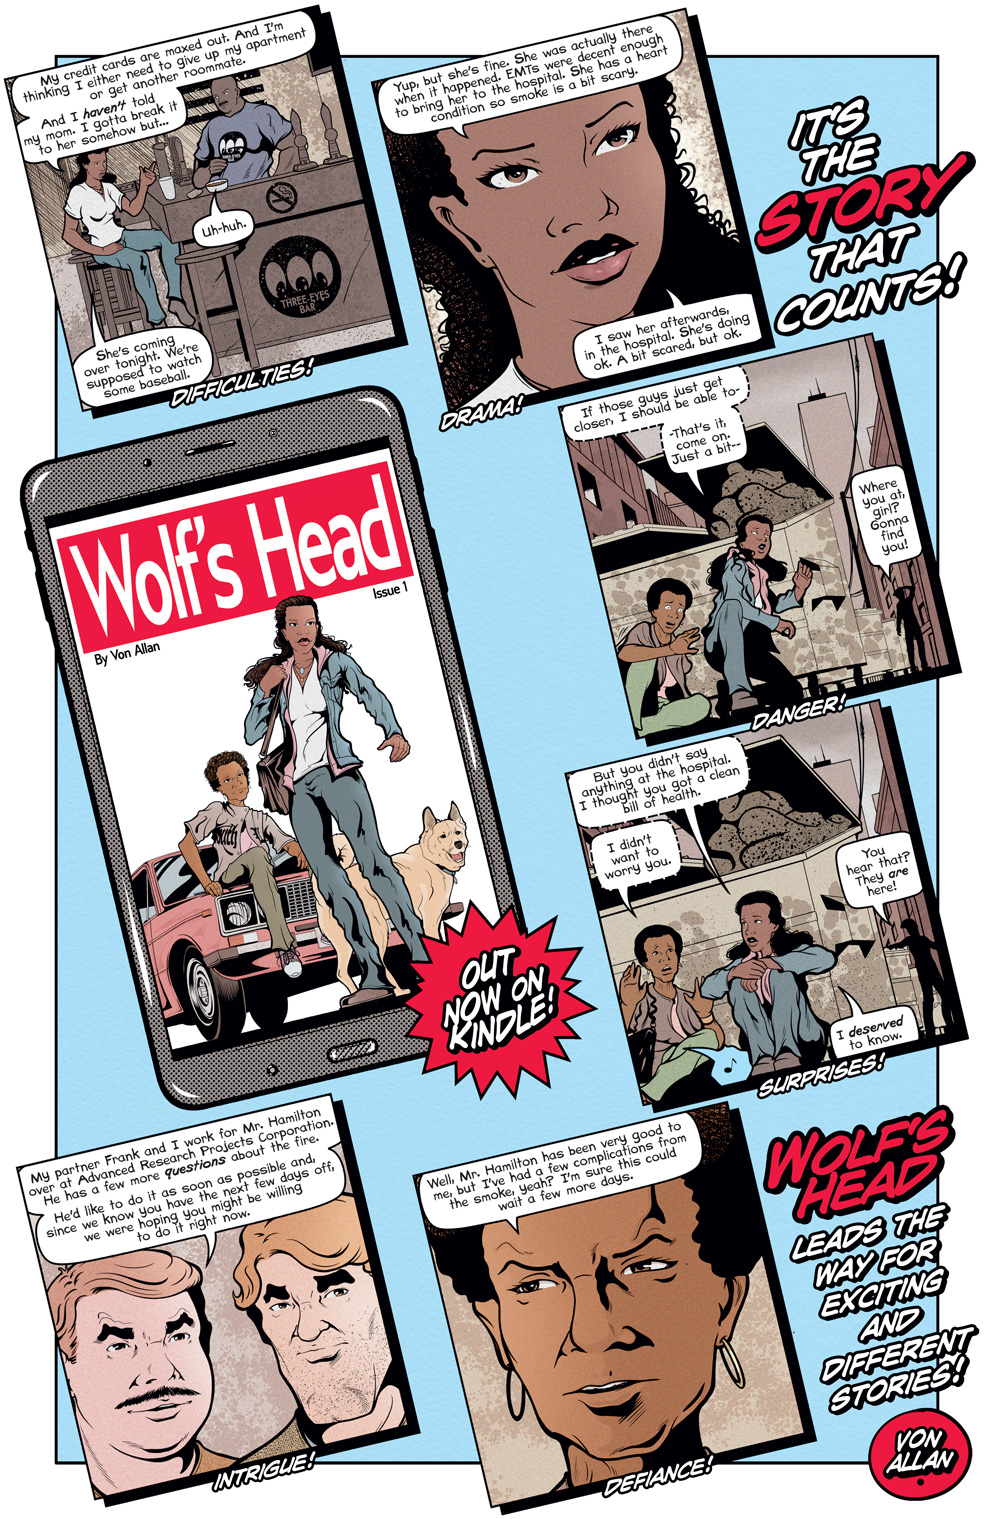 Teaser image for the first digital edition of WOLF'S HEAD issue 1 written and illustrated by Von Allan